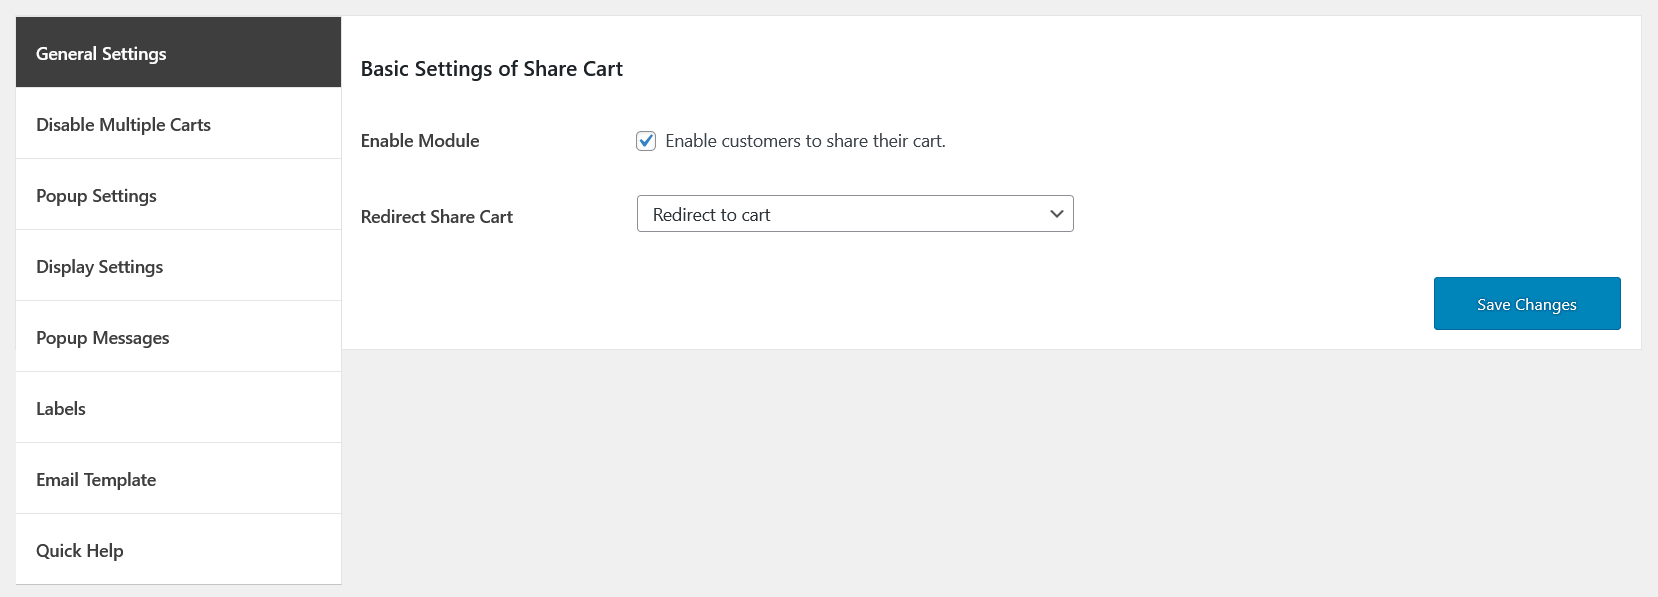 save and share cart general settings